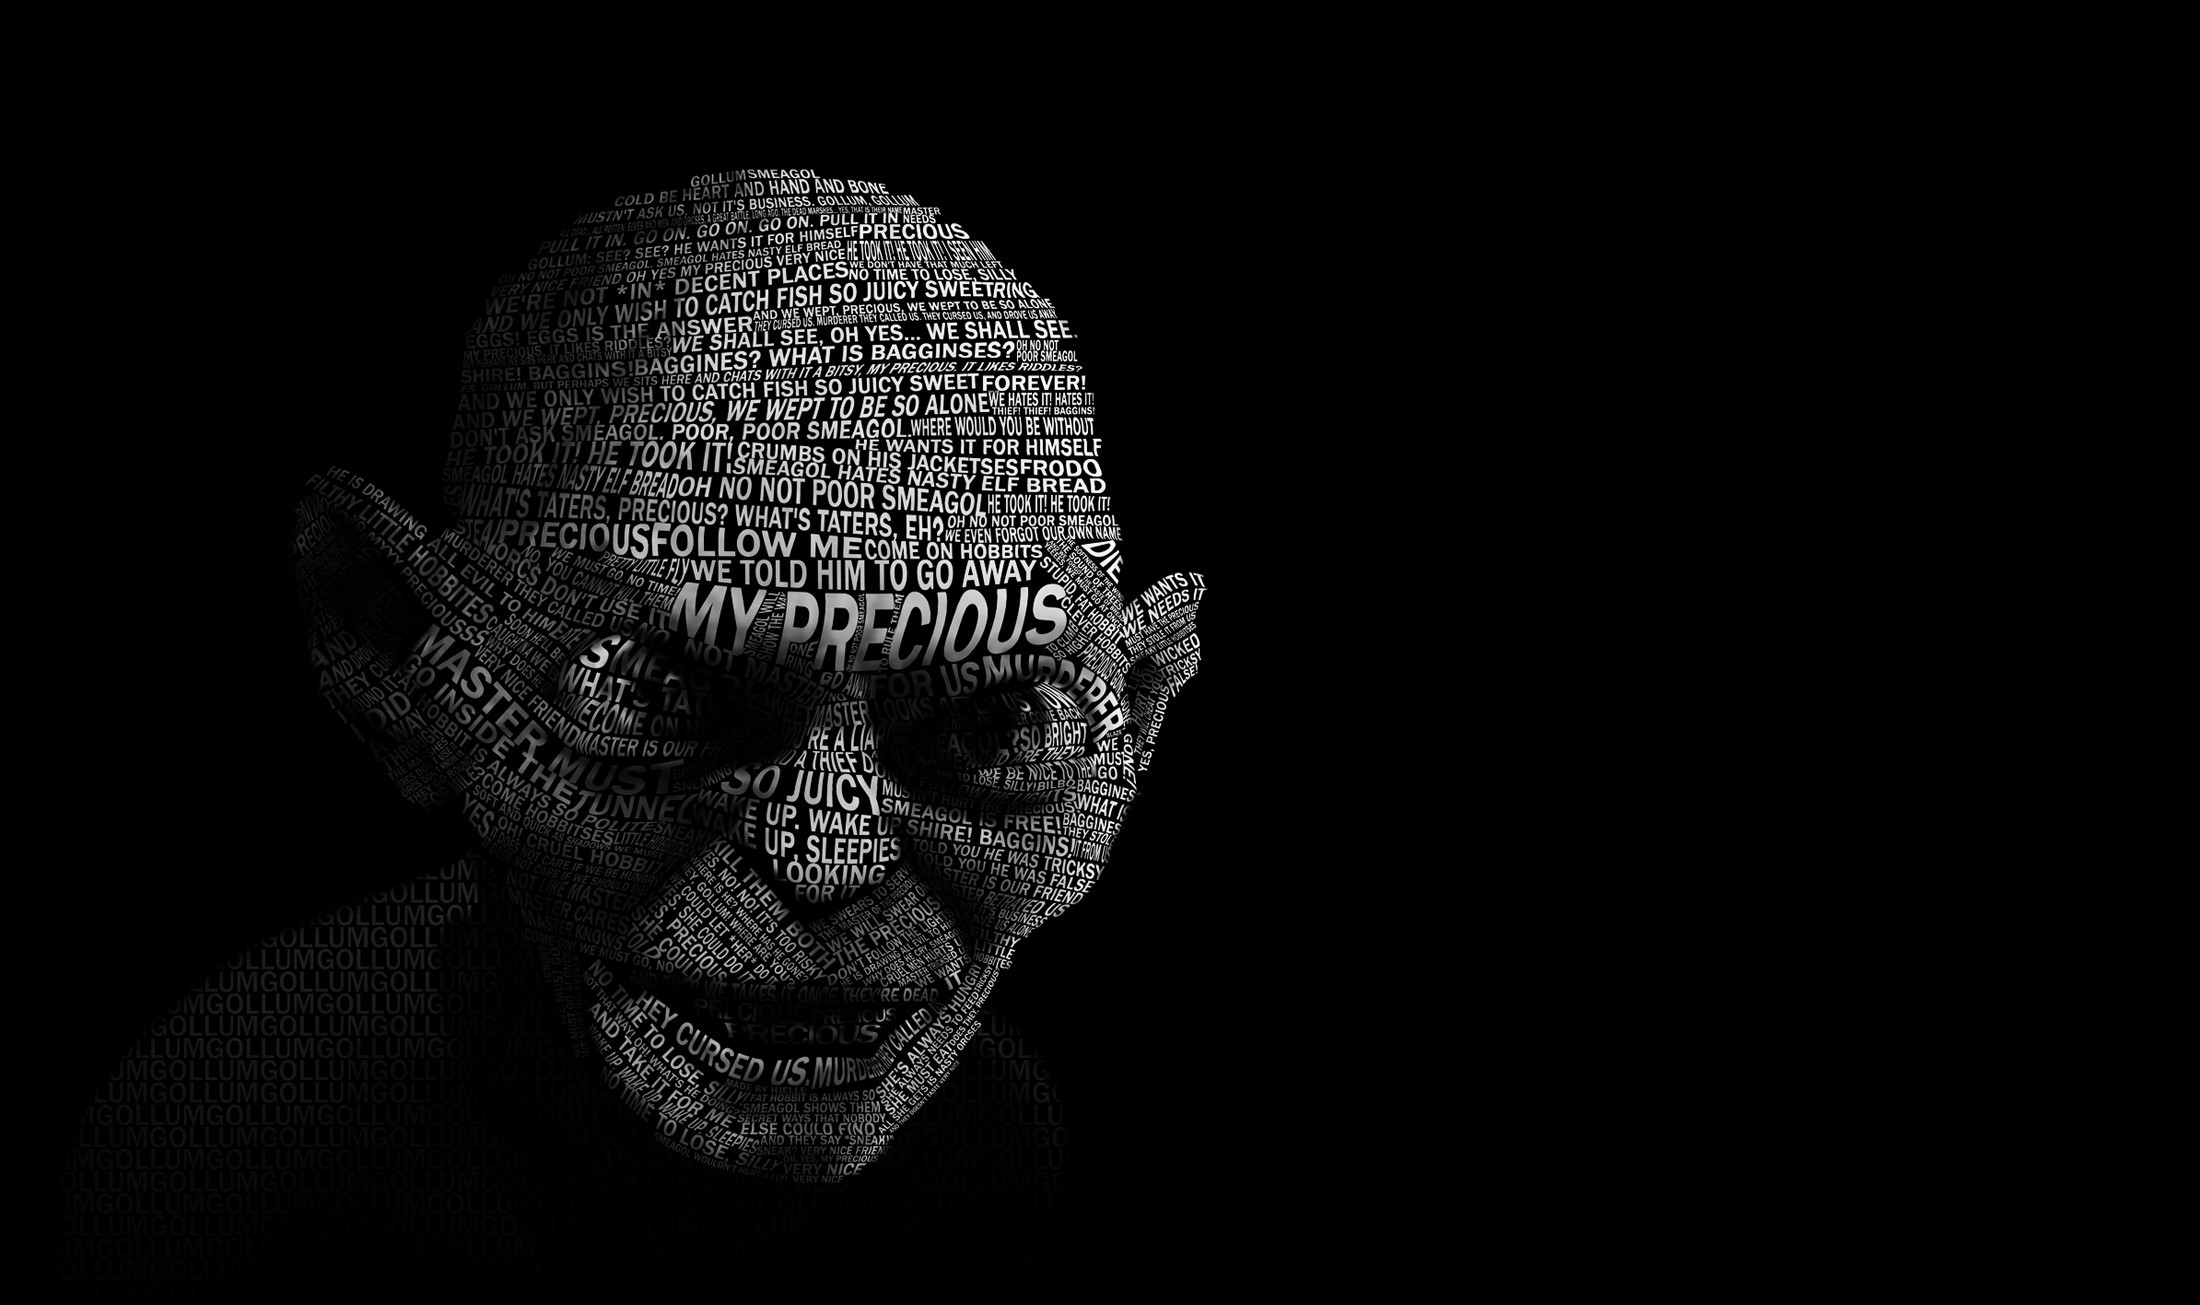 Gollum on black wallpaper wallpapers and images - wallpapers ...